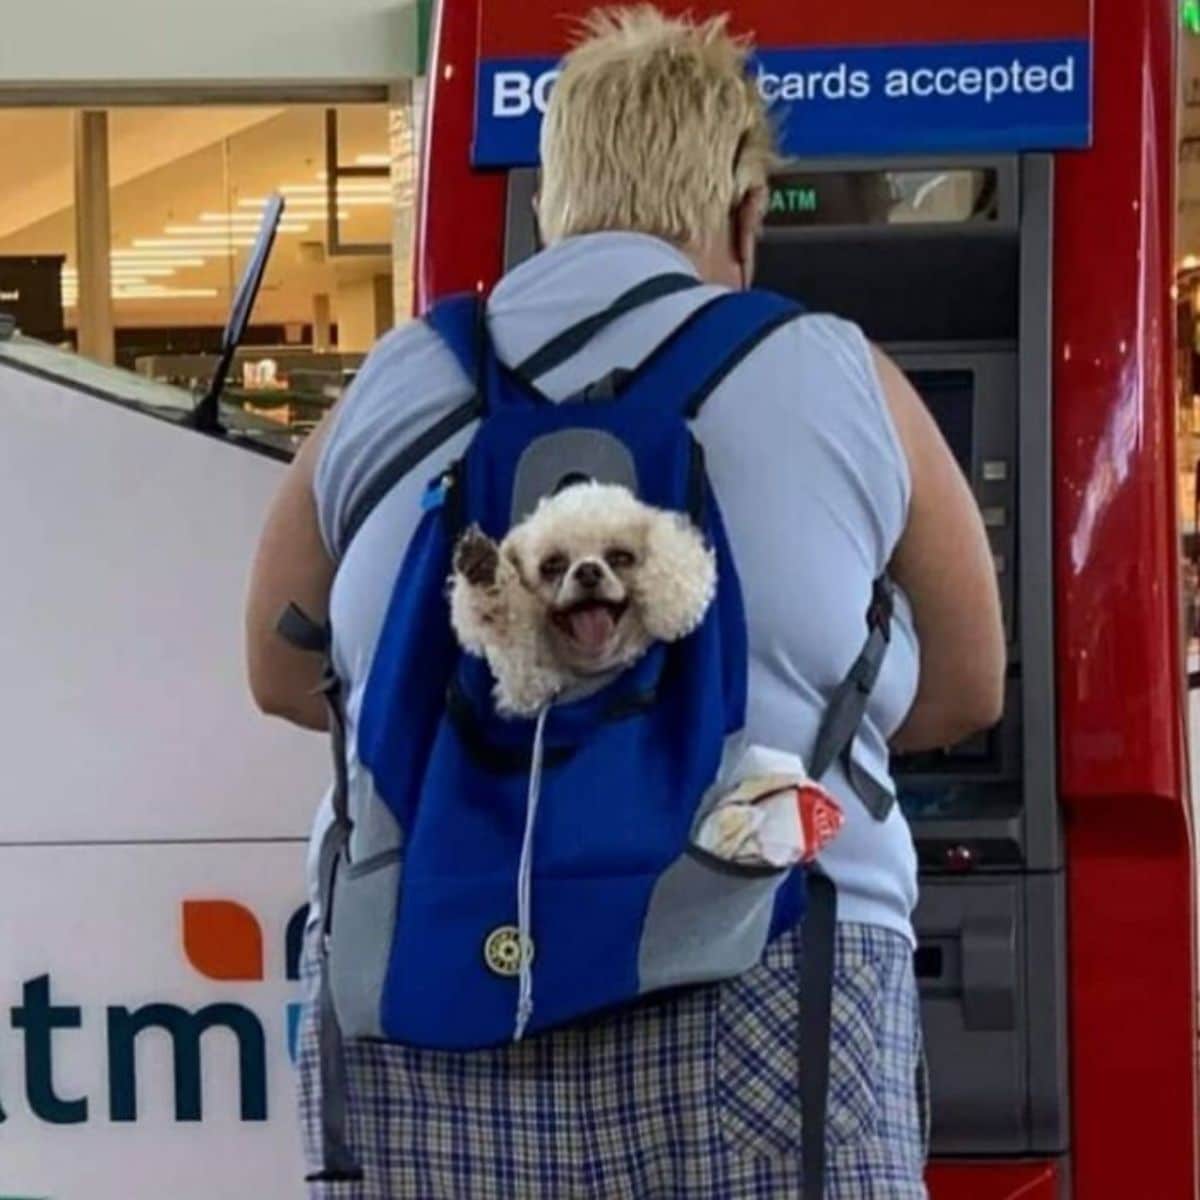 small white poodle in a blue and grey backpack worn by a person at an atm